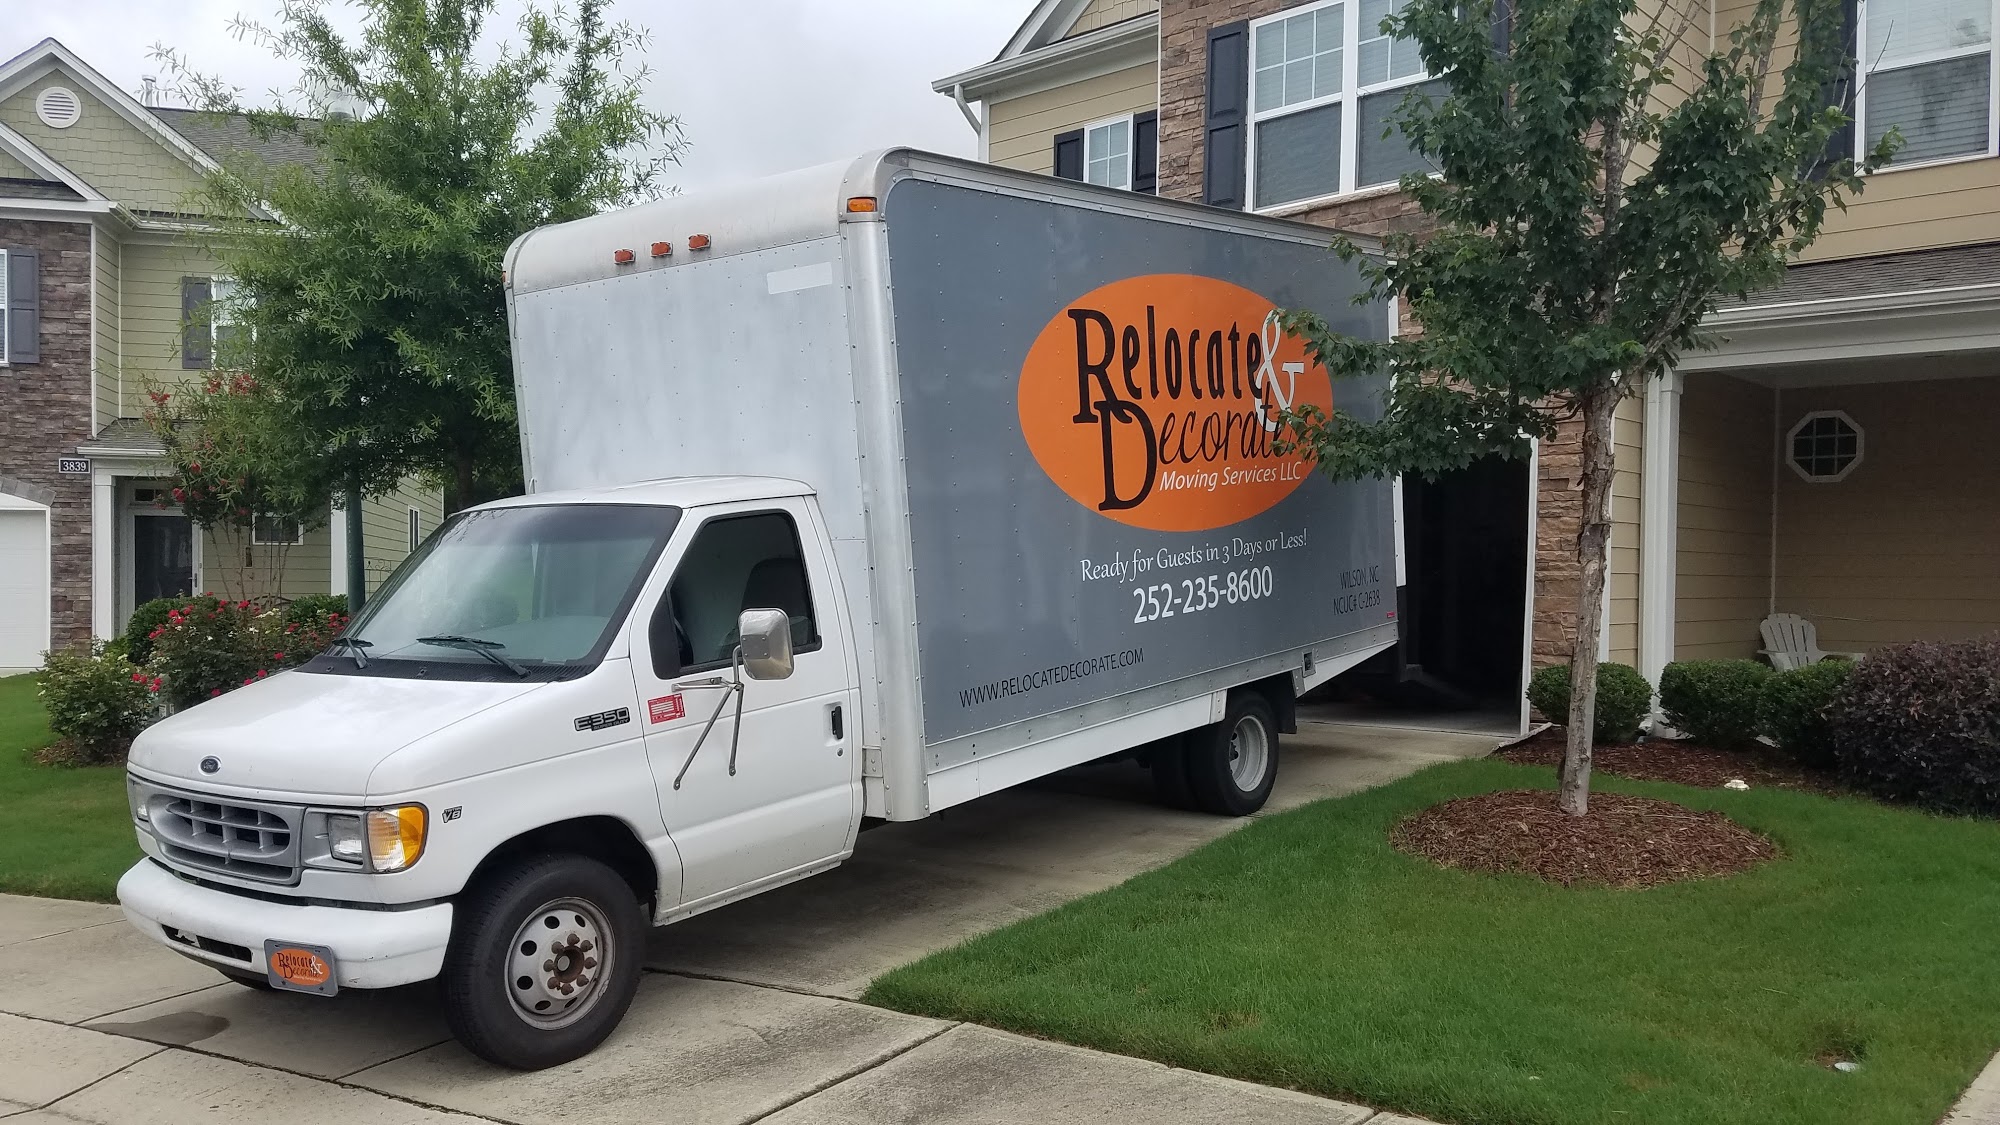 Relocate & Decorate Moving Services, LLC